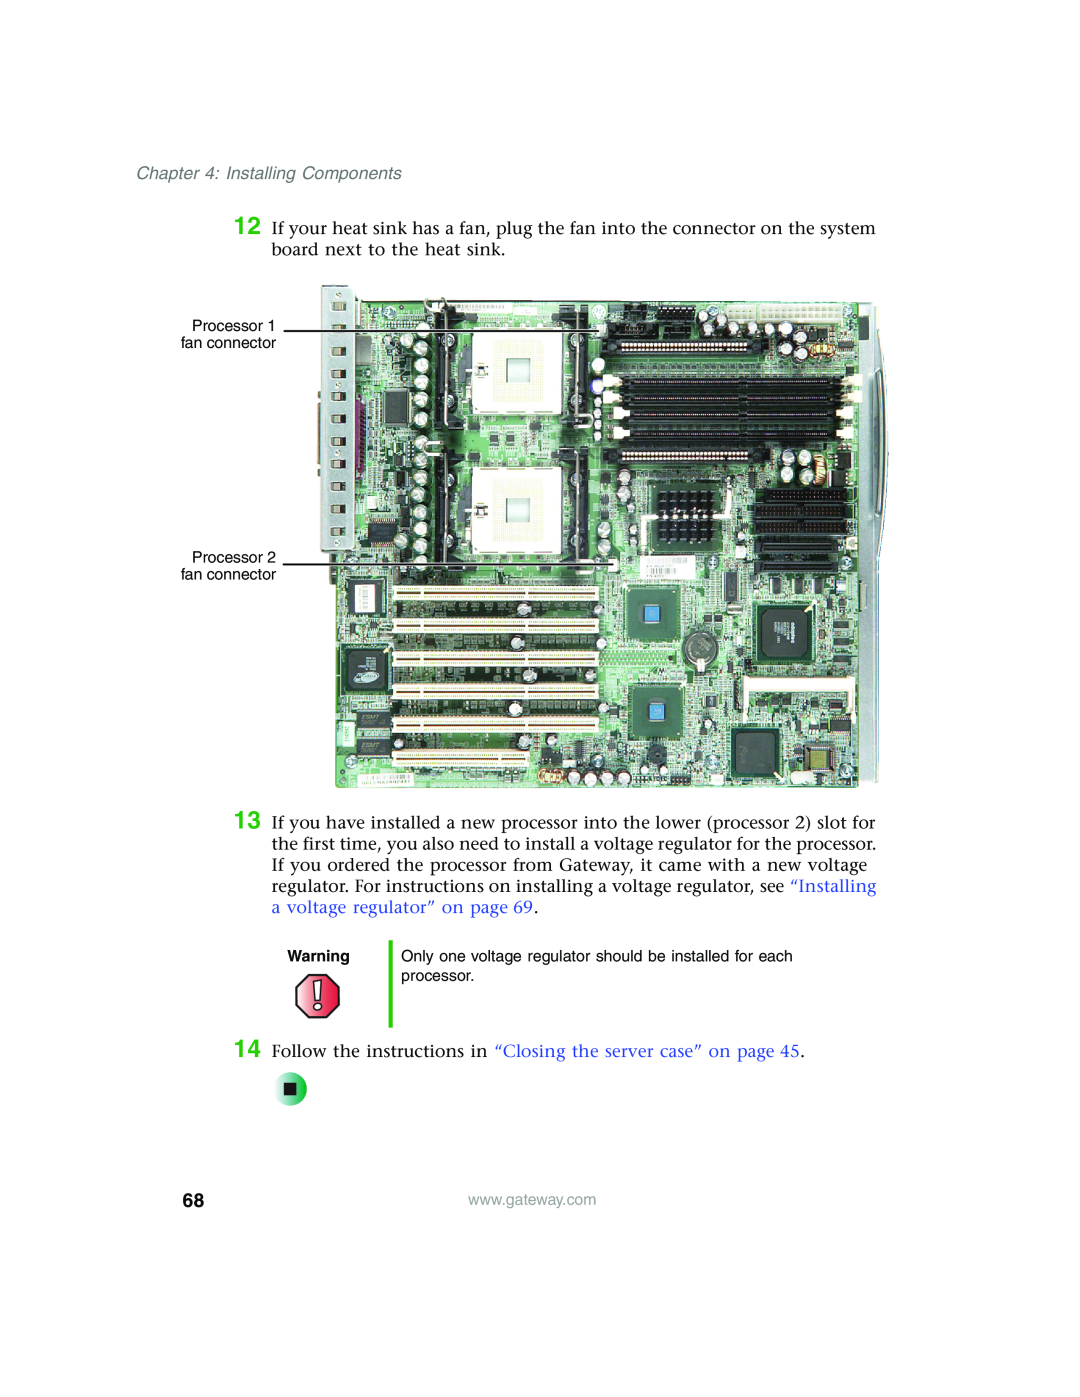 Gateway 960 manual Follow the instructions in “Closing the server case” on page, Installing Components 